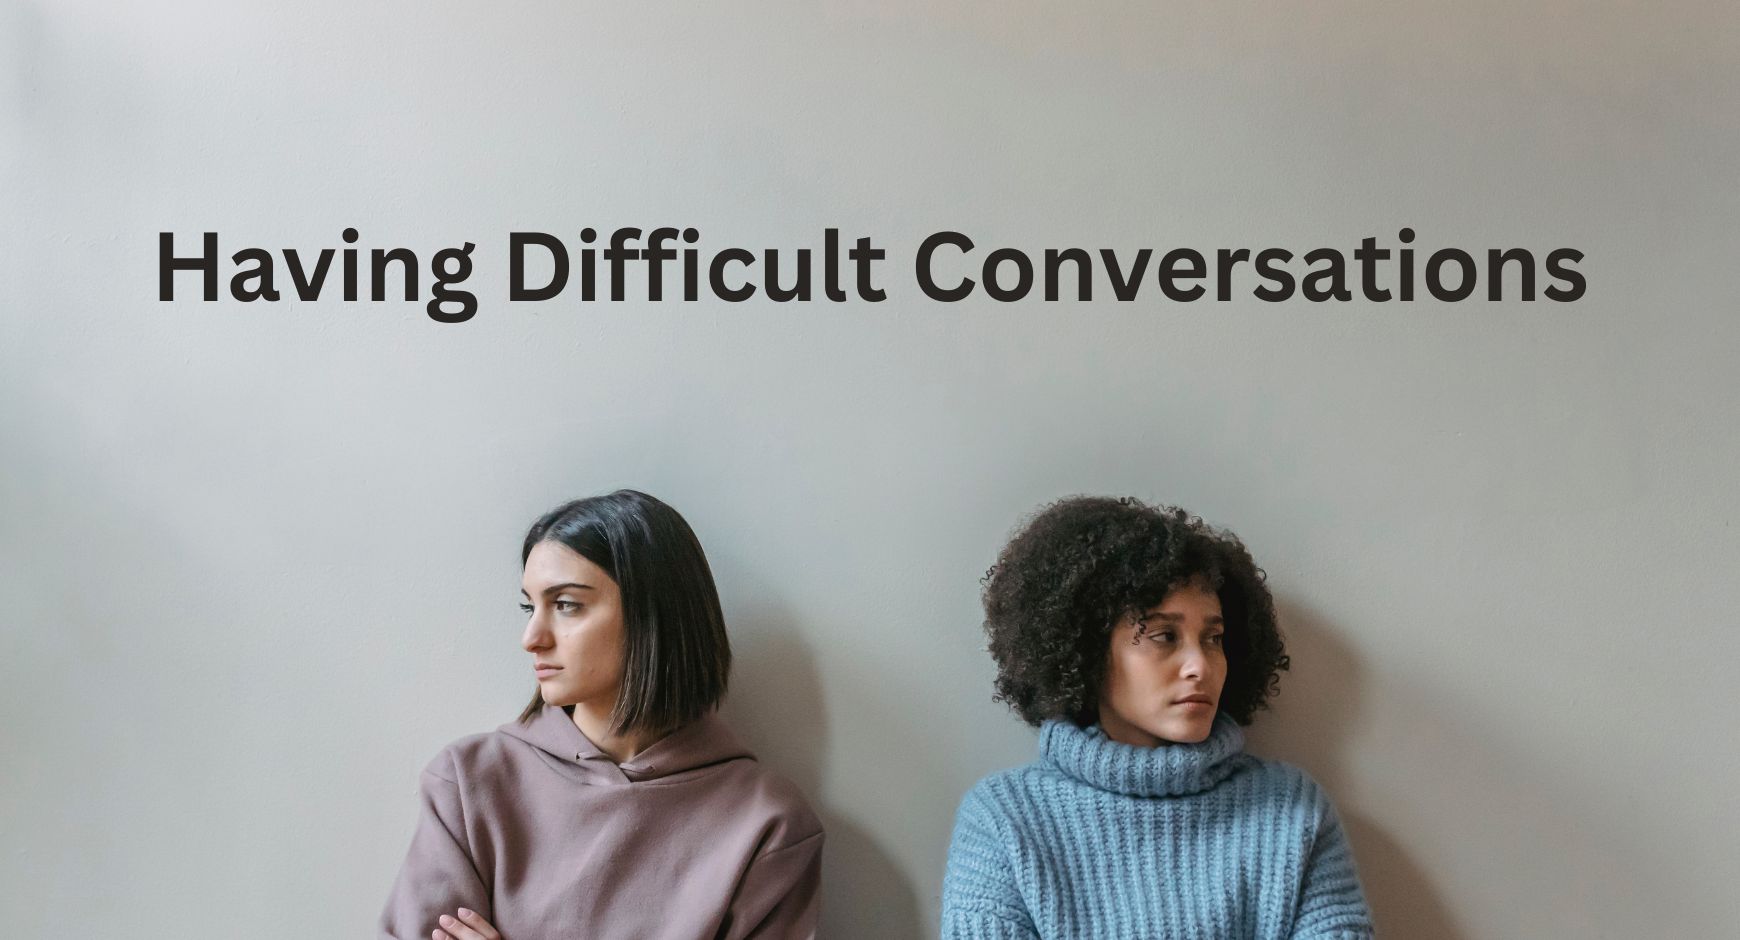 Two women looking away from each other upset under words that read "Having Difficult Conversations"